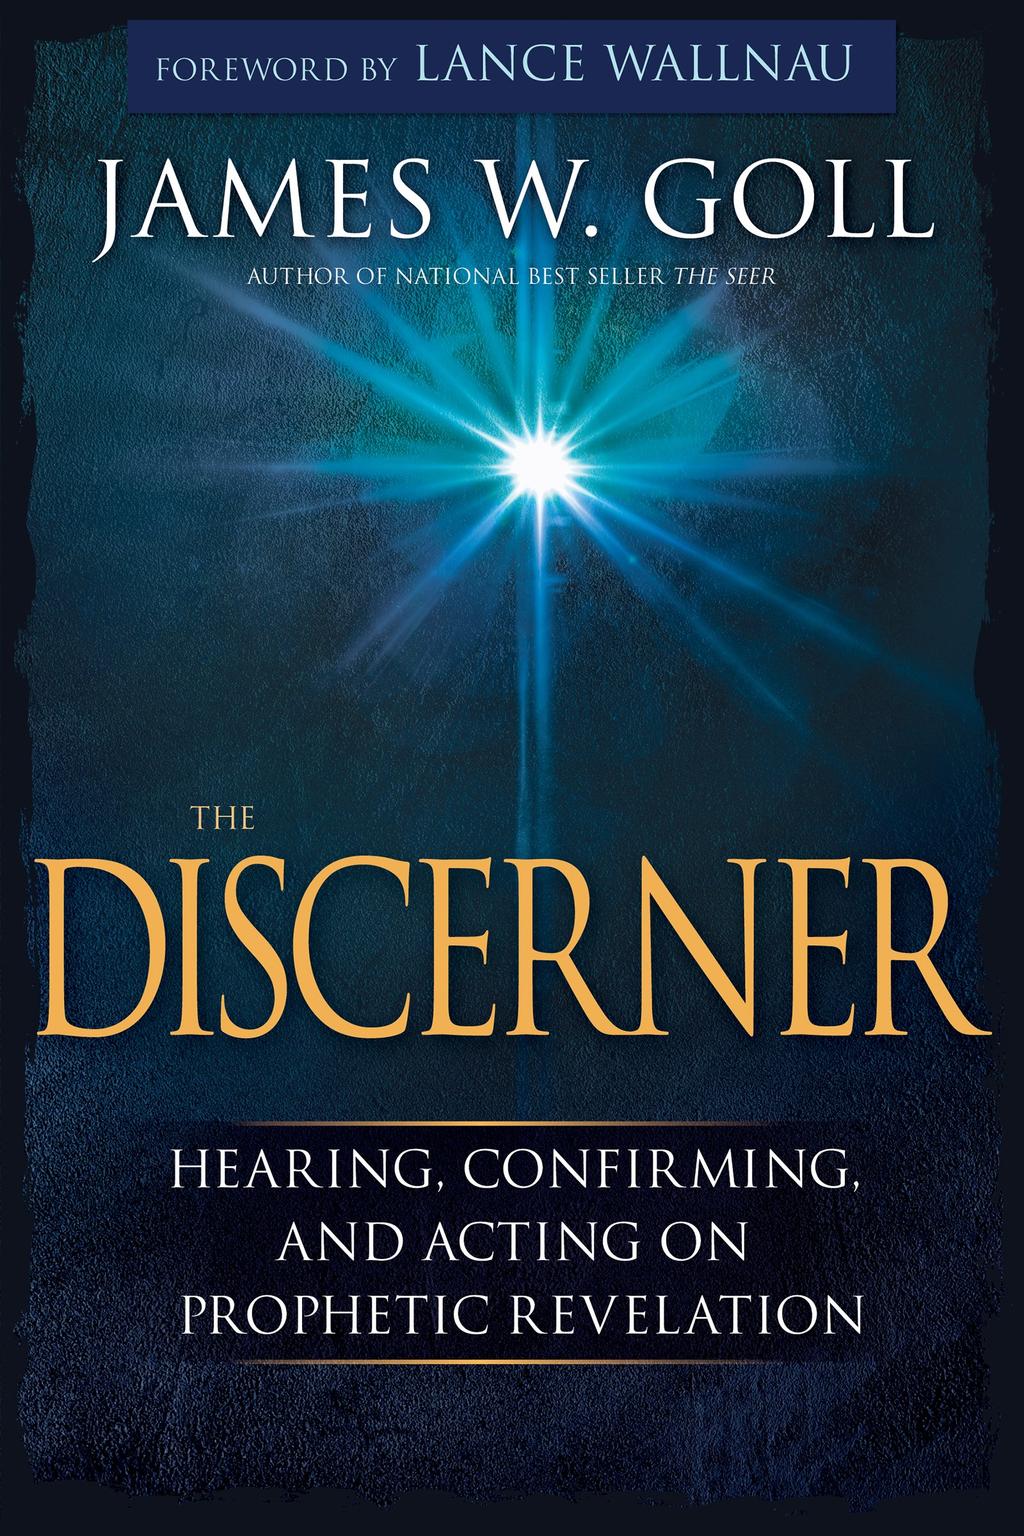 First six weeks - Receiving Revelation Surrendering Your Senses to the Holy Spirit Seeing: The Eyes of Your Heart Hearing: Whatever He Hears, He Will Speak Feeling: From the Heart Flow the Issues of